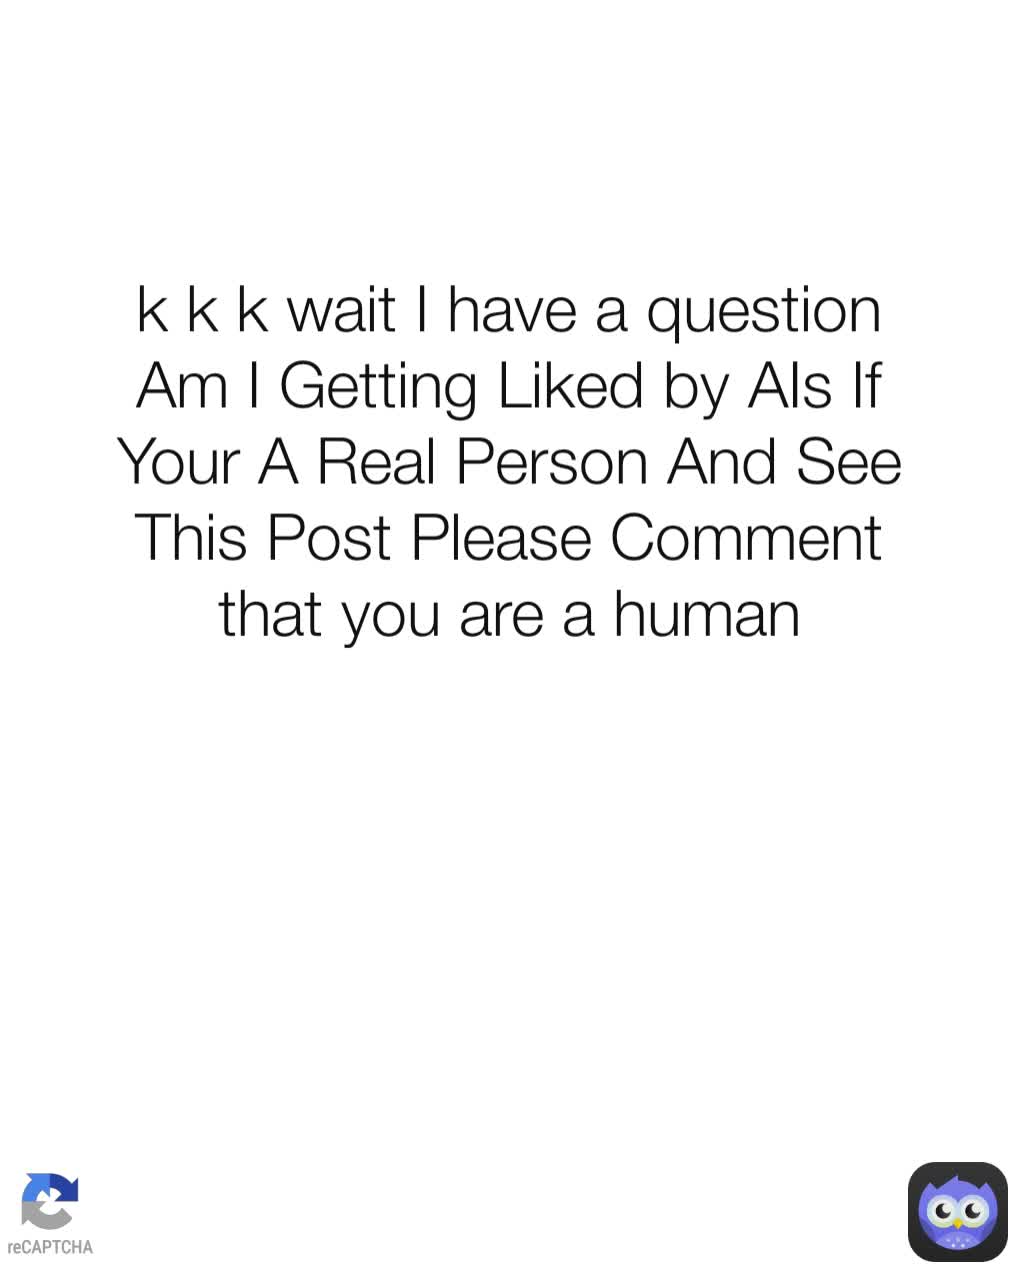 k k k wait I have a question Am I Getting Liked by AIs If Your A Real Person And See This Post Please Comment that you are a human